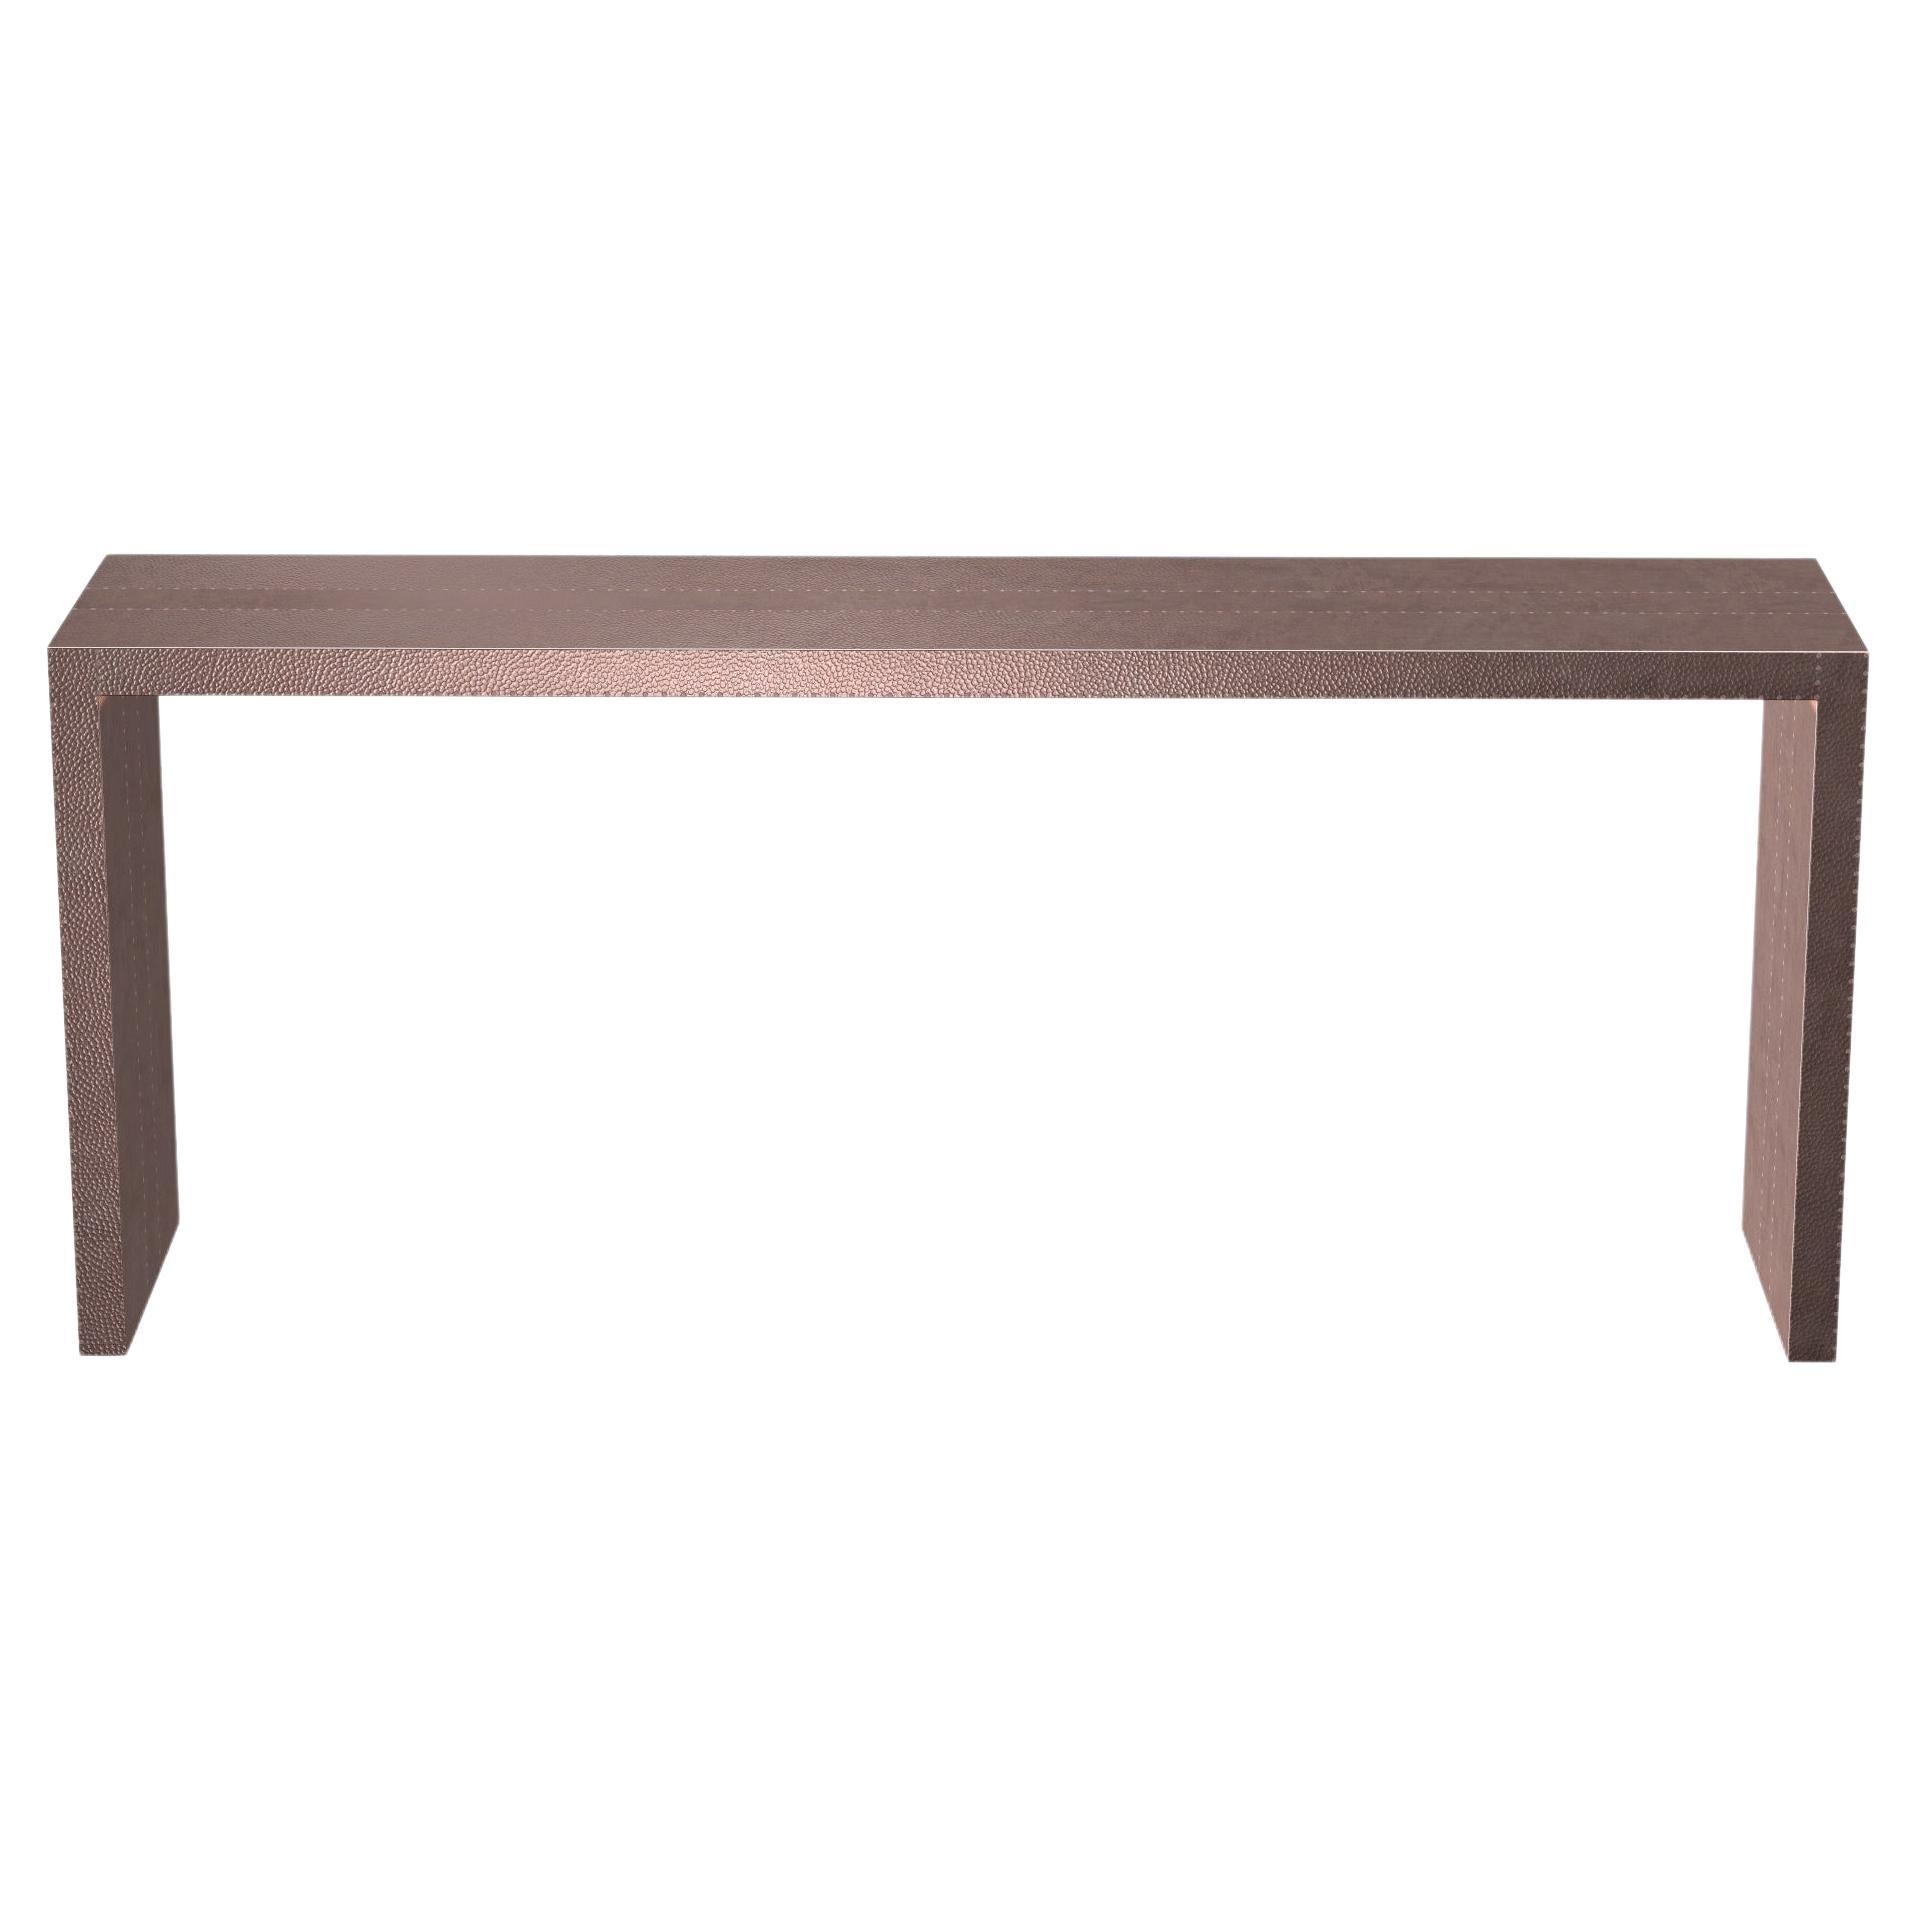 Art Deco Desks and Writing Console Tables Mid.Hammered in Copper by Alison Spear For Sale